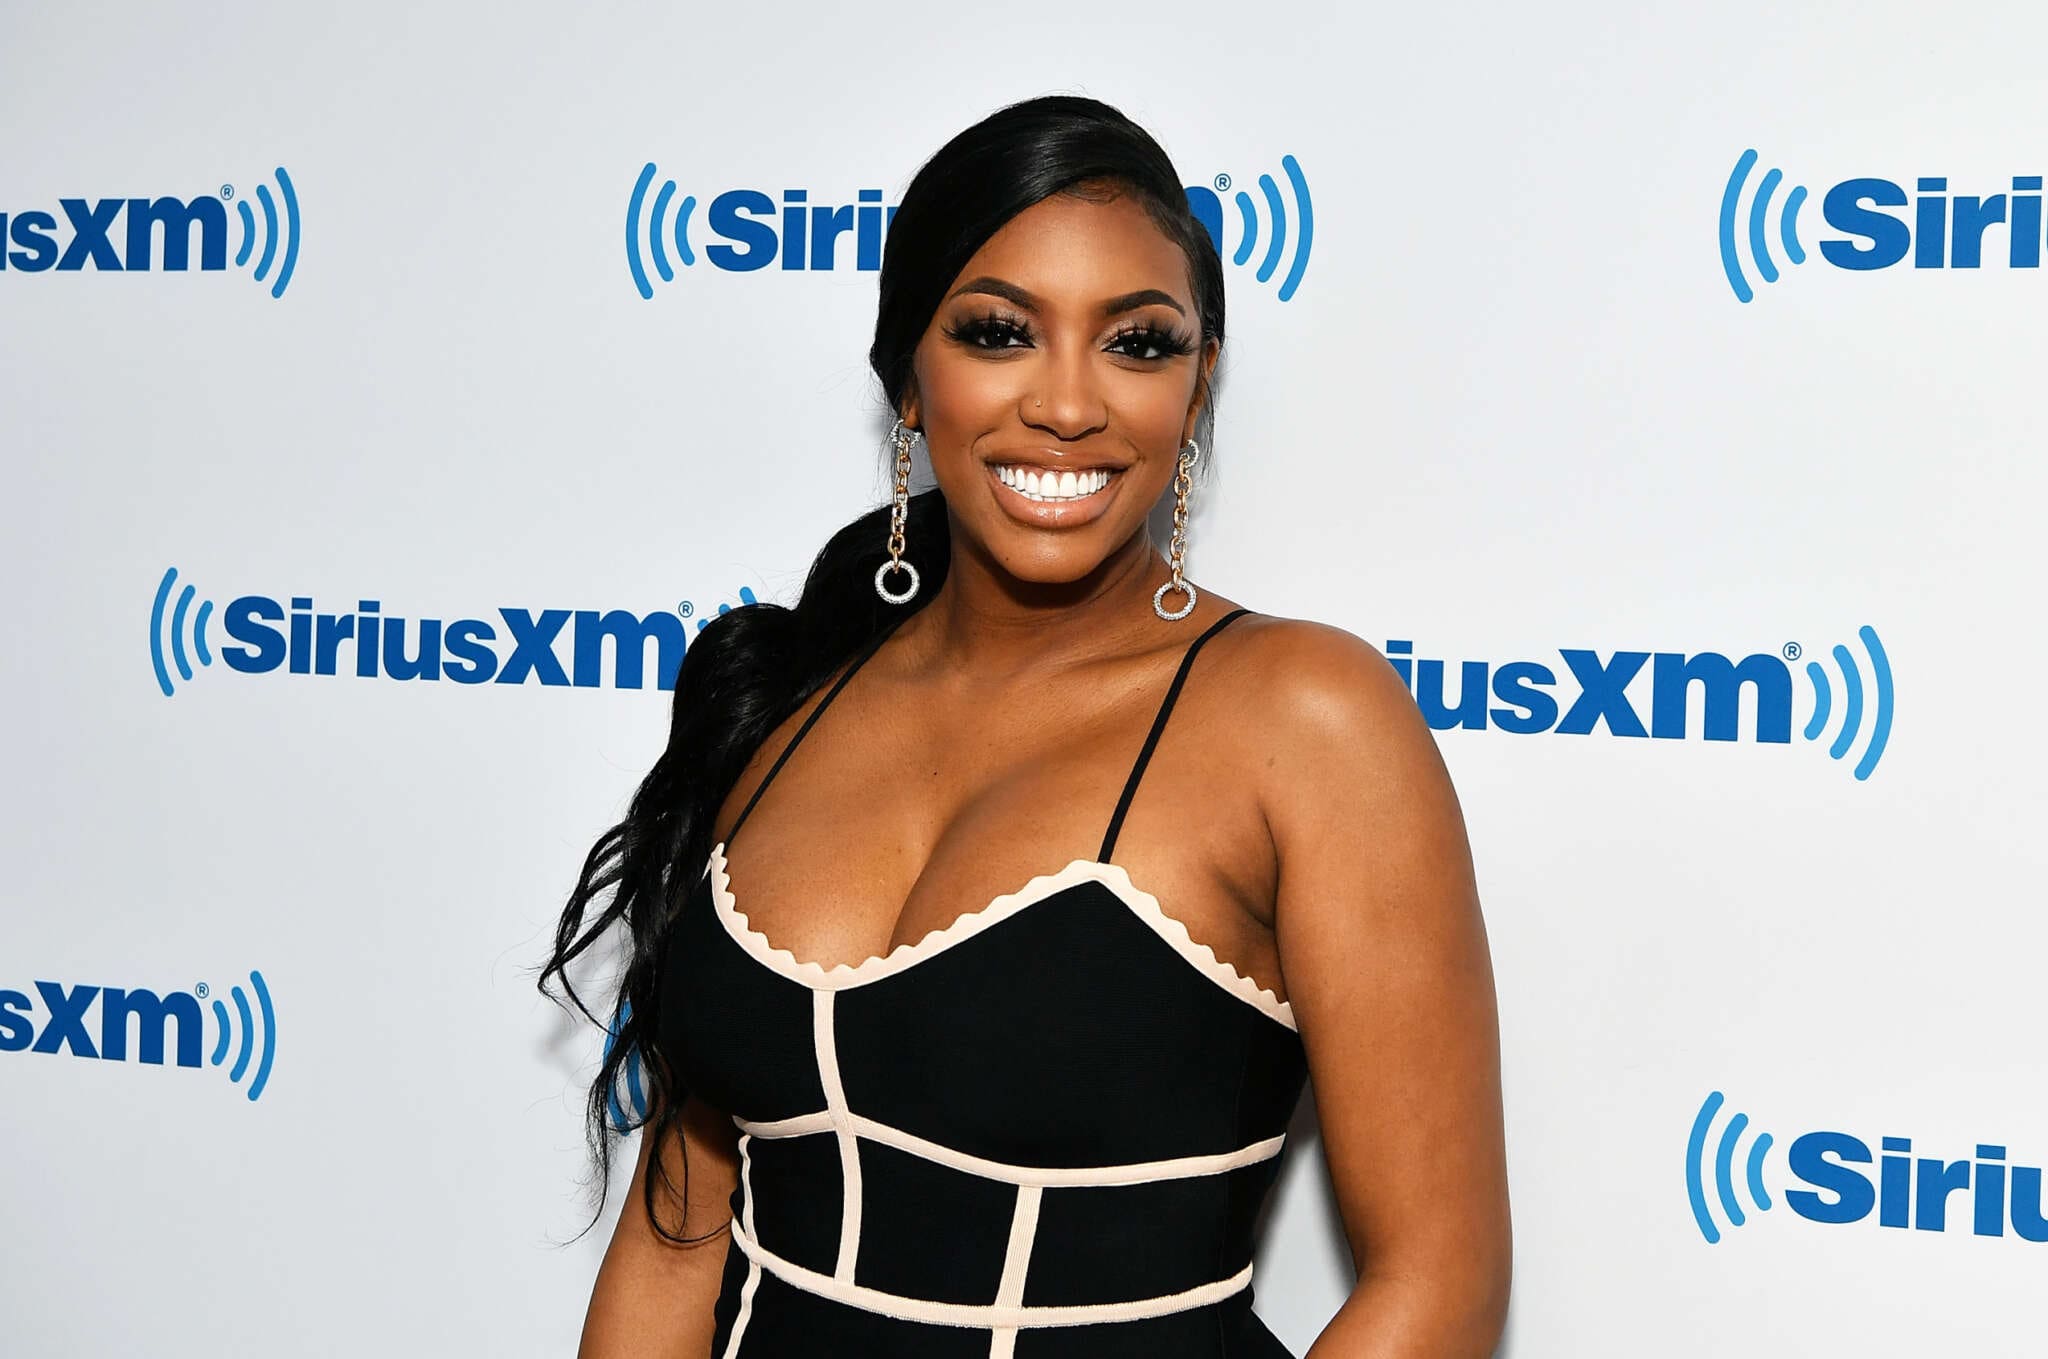 Porsha Williams Is Ageing Backwards - Check Out Her Drop-Dead Gorgeous Image